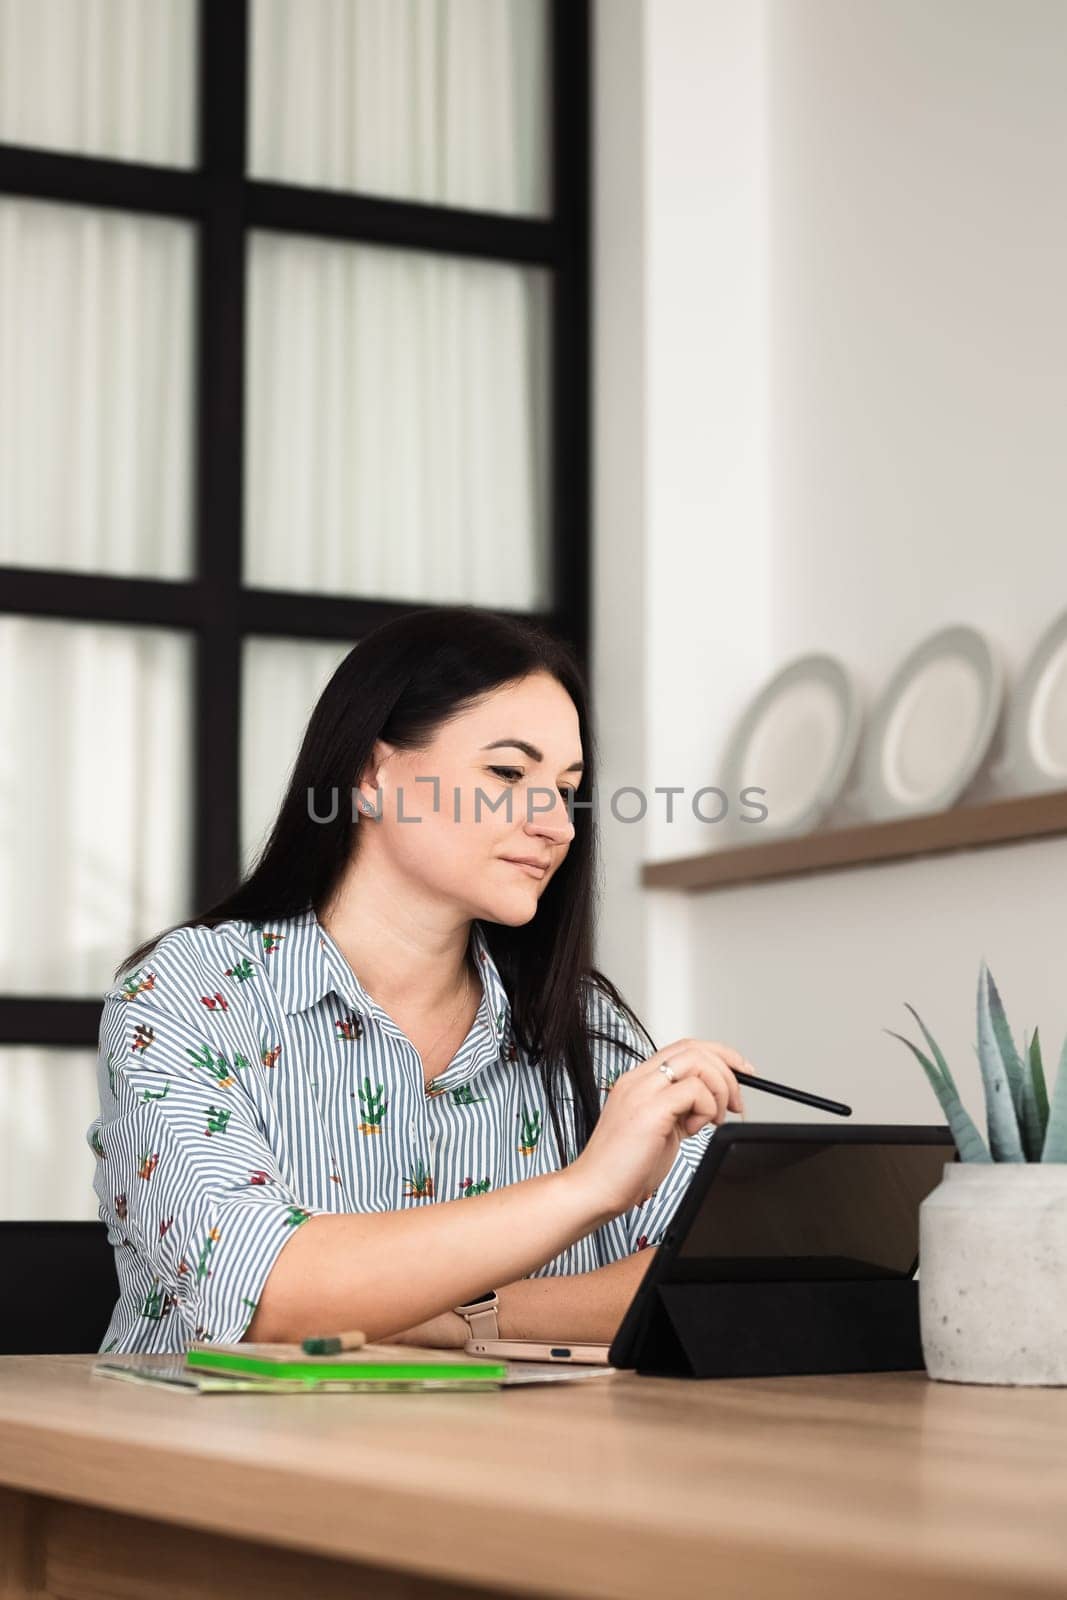 In the office, a young brunette girl is working on a tablet